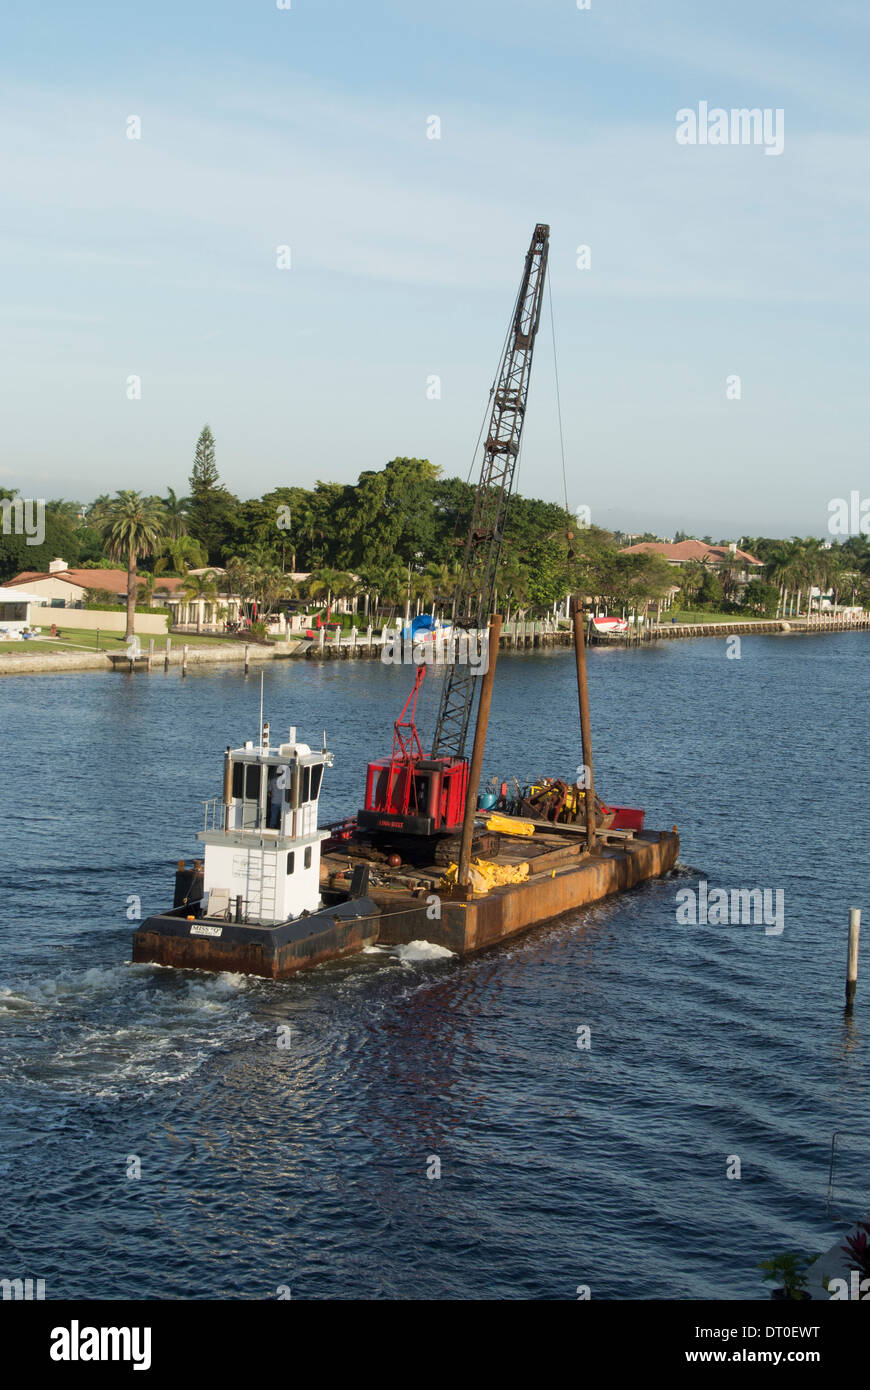 Pile driver barge on Intracoastal waterway. Stock Photo